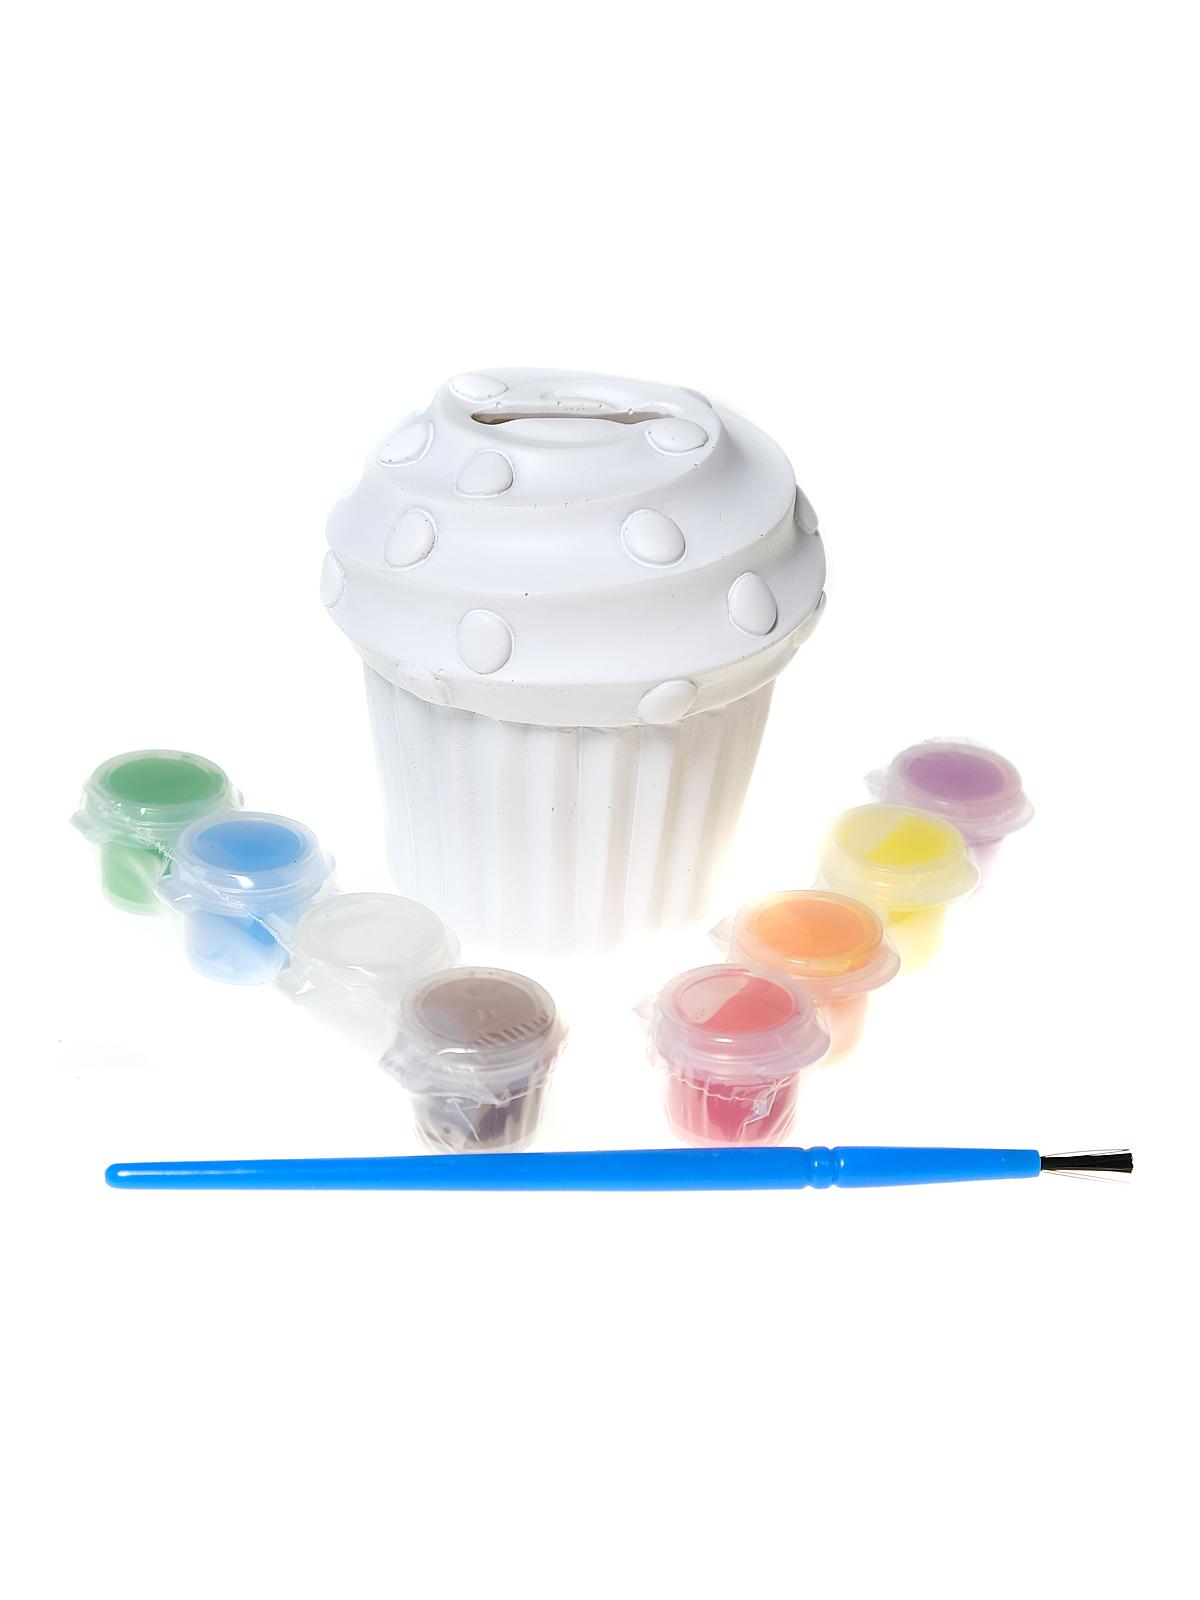 Decorate Your Own Kits Resin Cupcake Bank